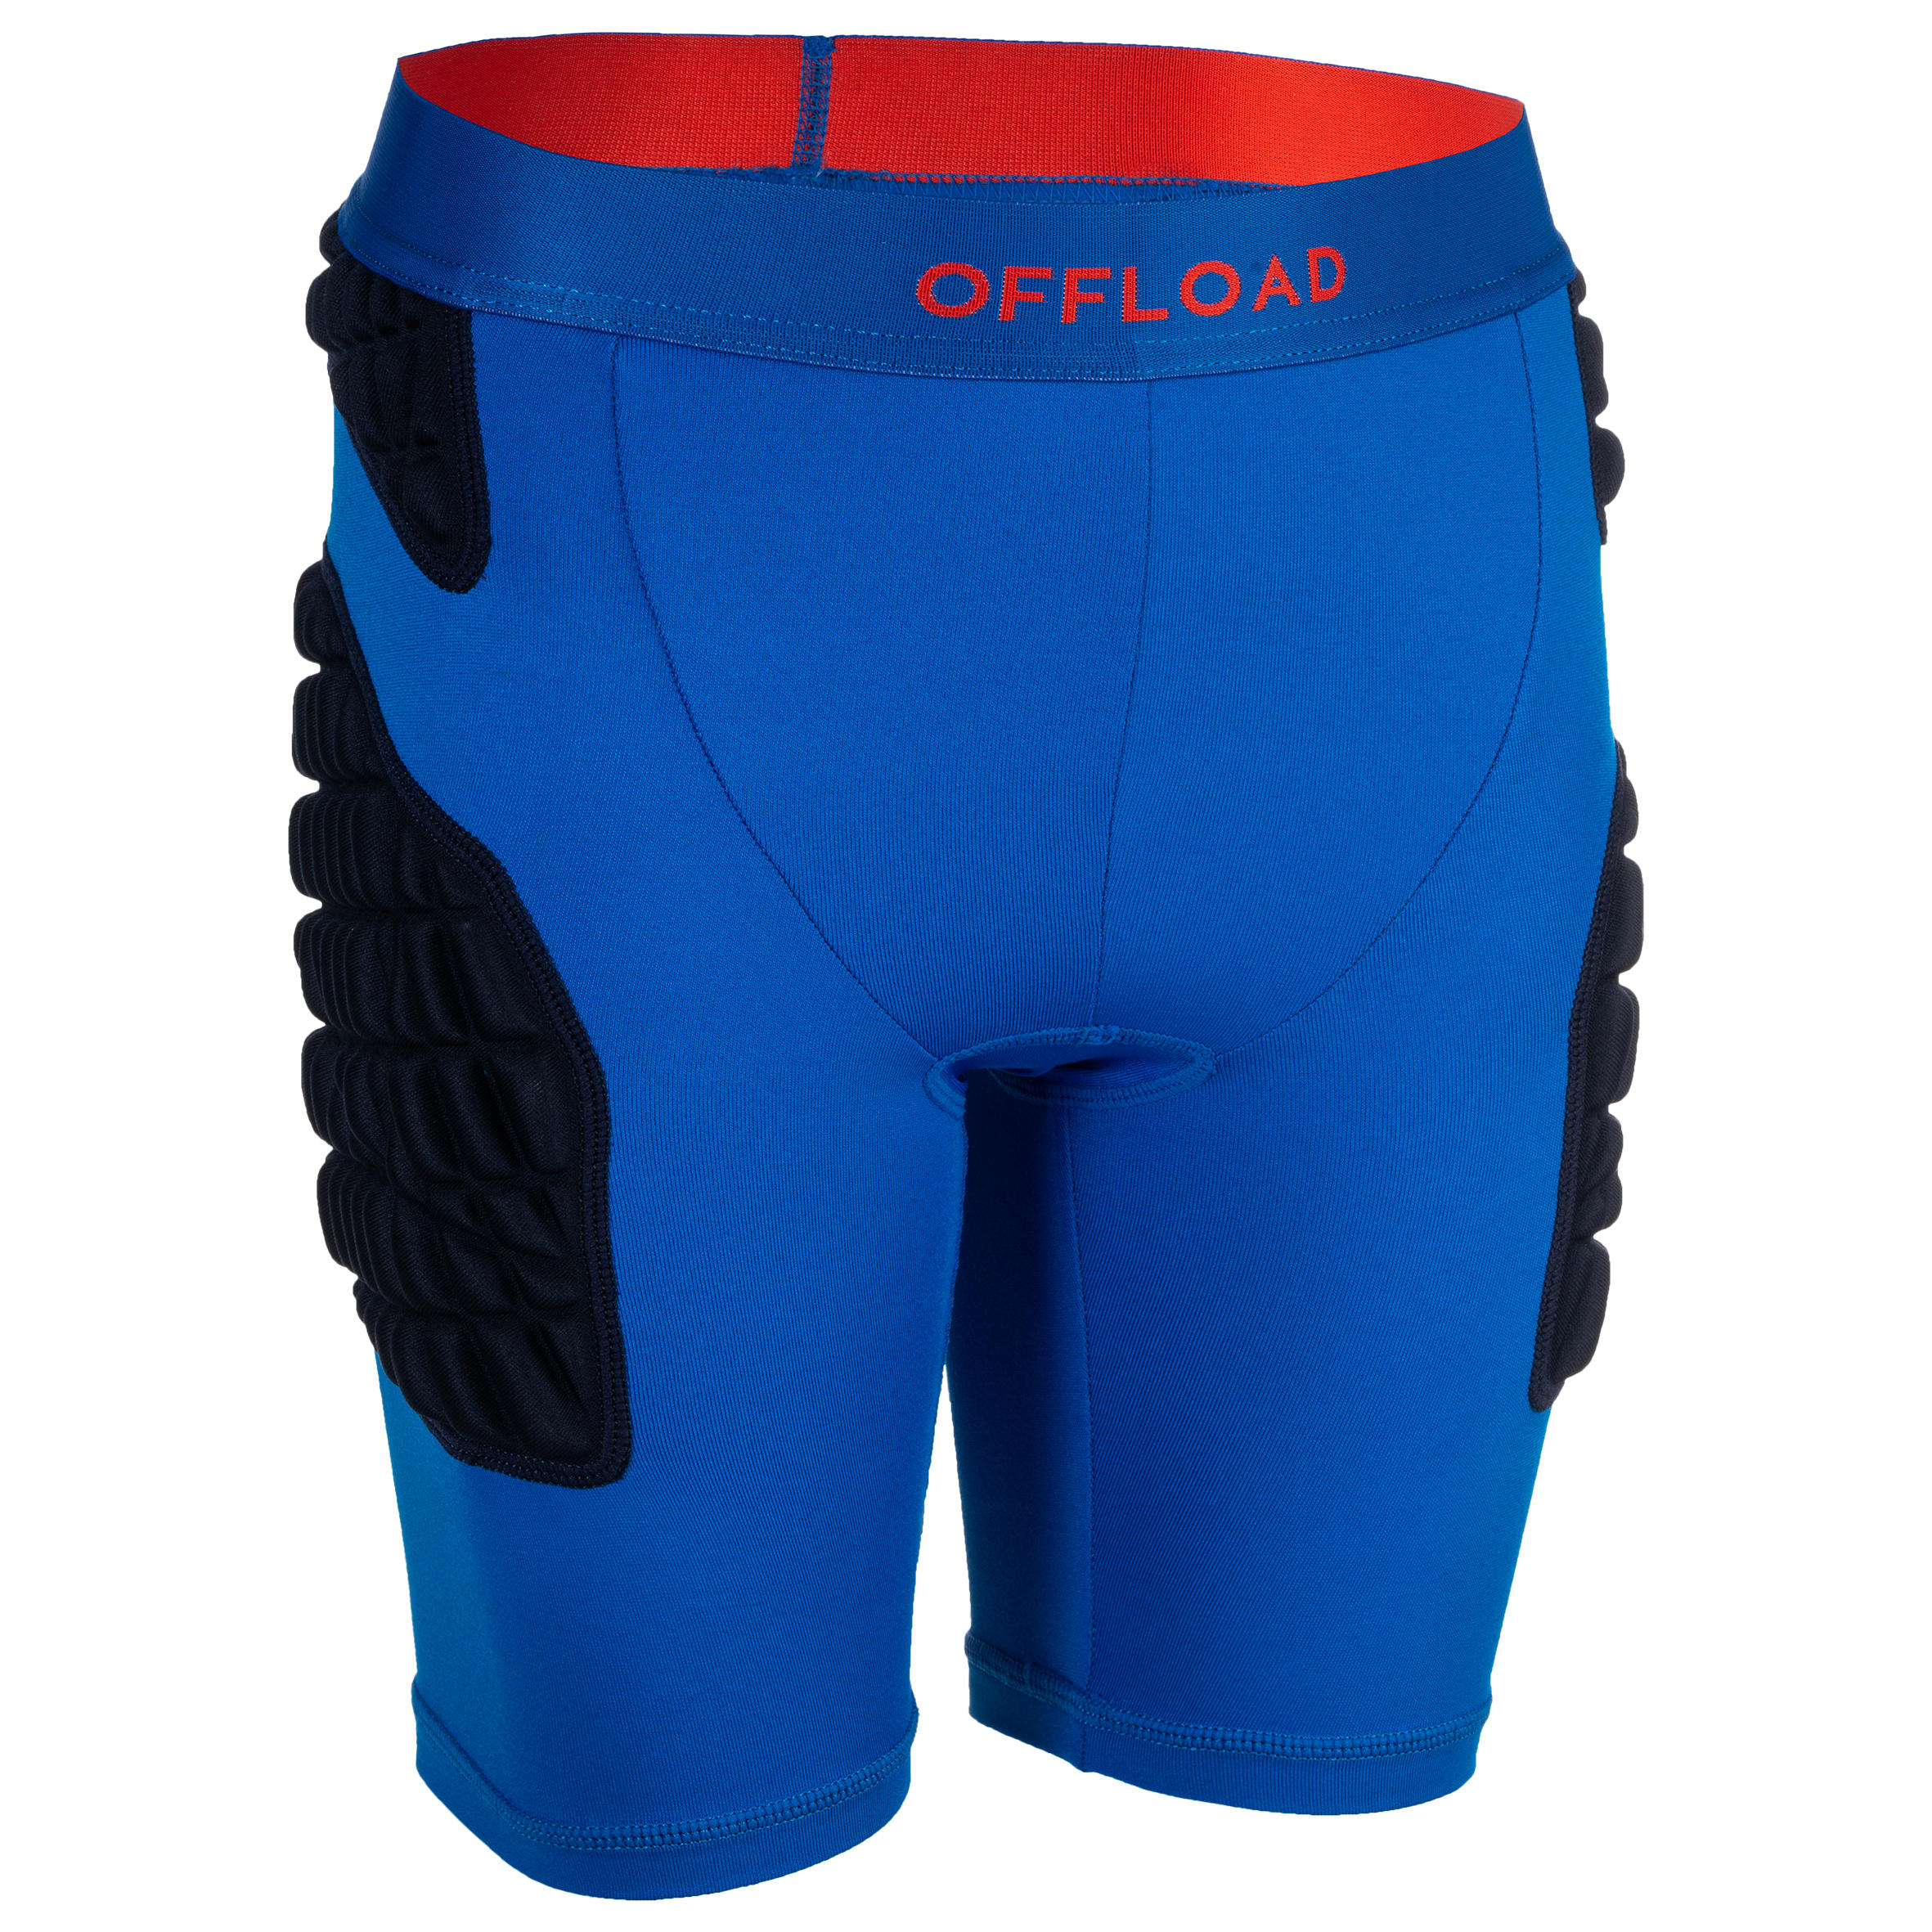 OFFLOAD Kids' Protective Rugby Undershorts R500 - Blue